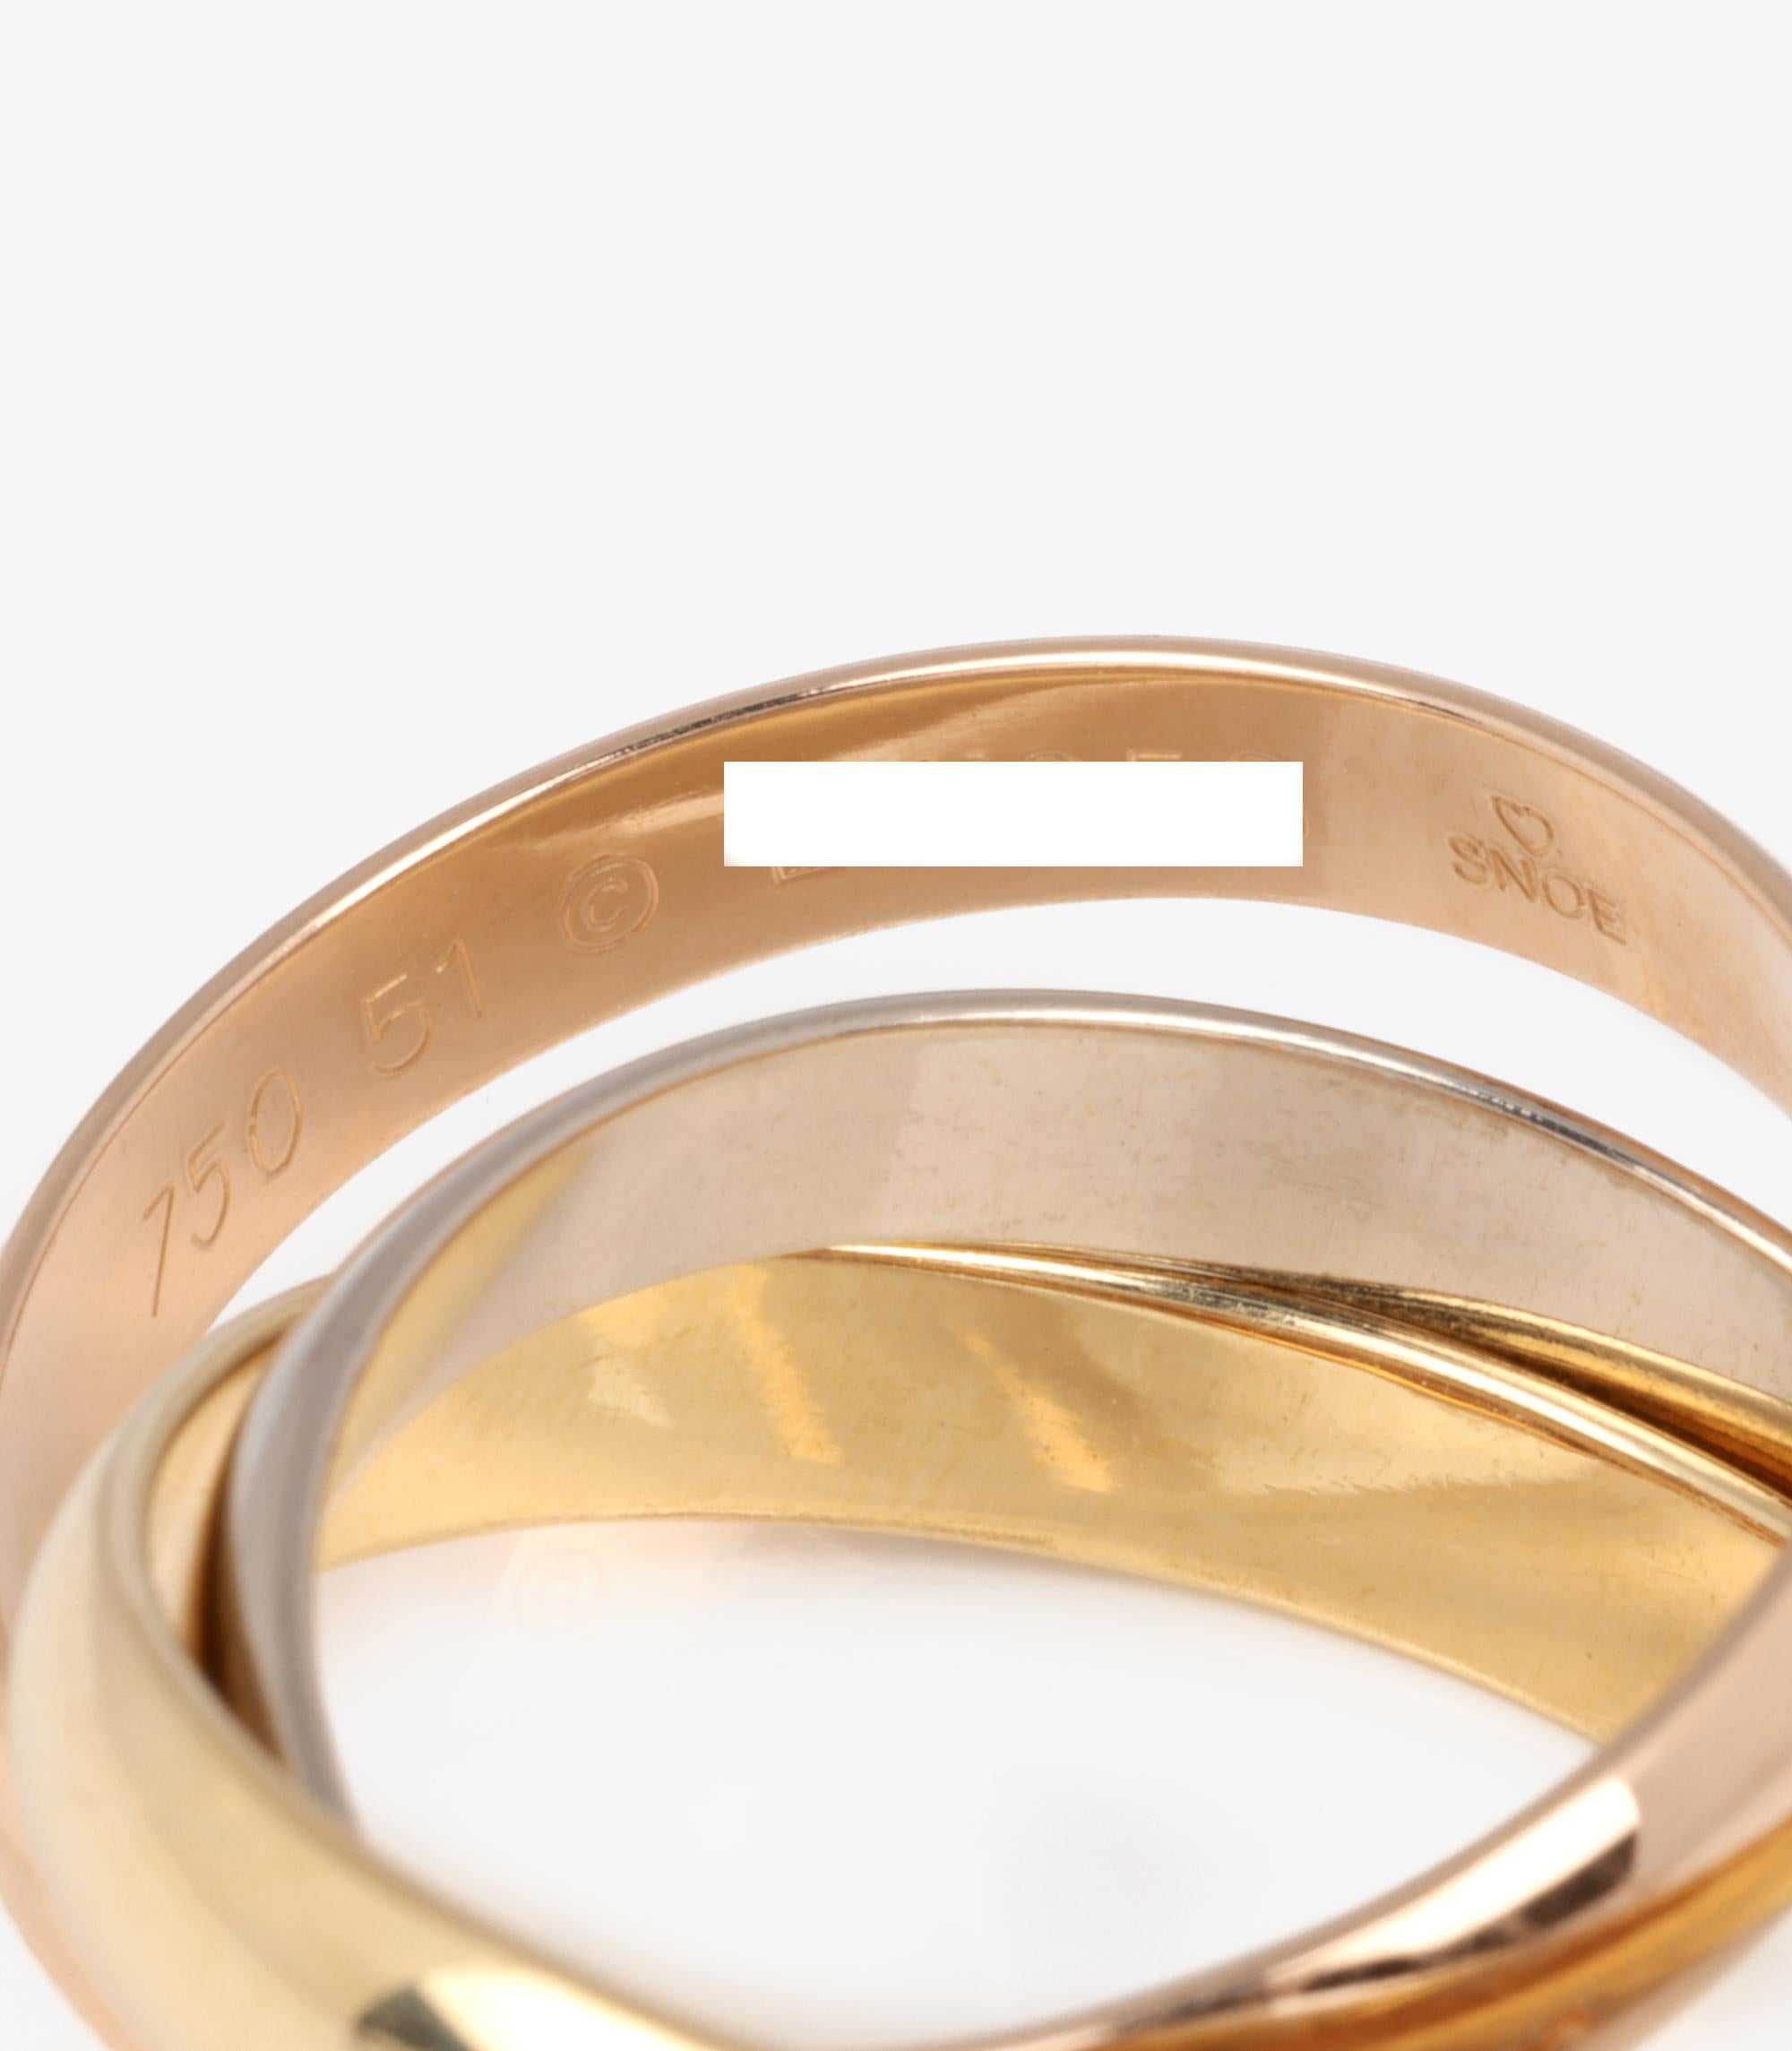 Cartier 18ct White Gold, 18ct Yellow Gold And 18ct Rose Gold Medium Trinity Ring In Excellent Condition For Sale In Bishop's Stortford, Hertfordshire